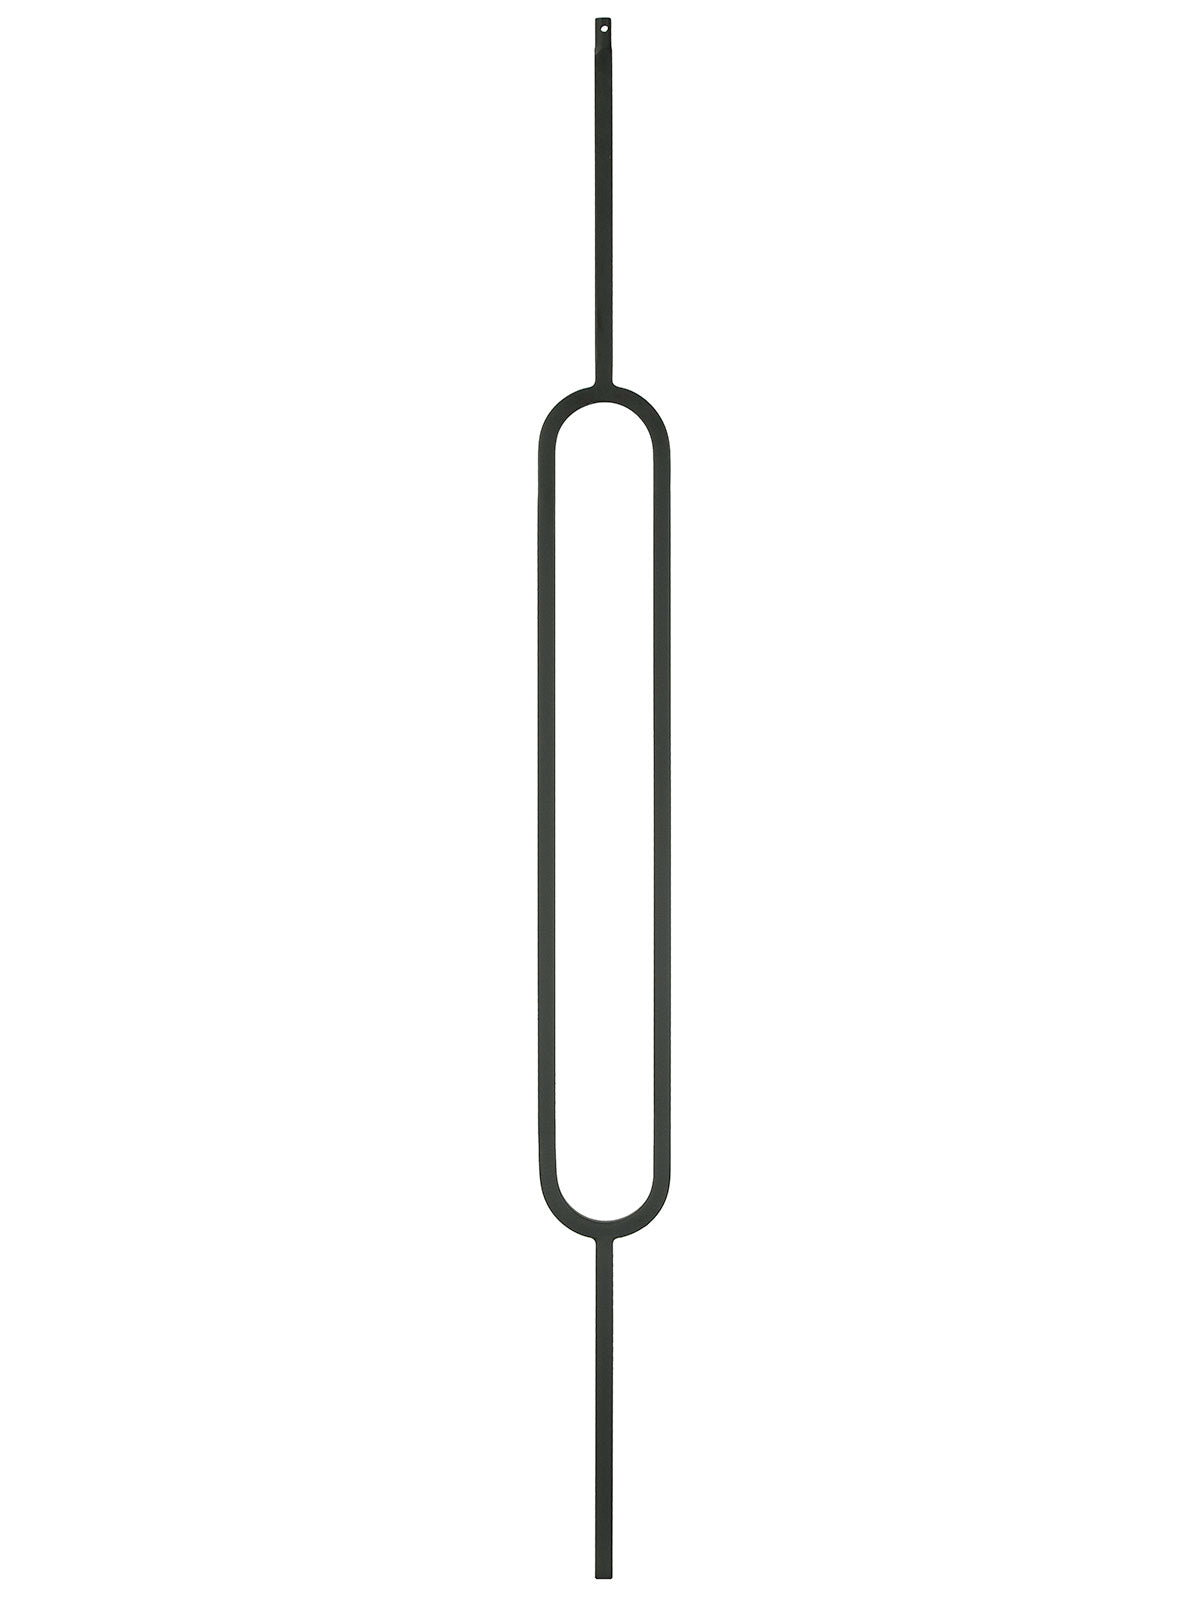 Iron Baluster 9088XL - 1/2" Square - 24" Contemporary Oval